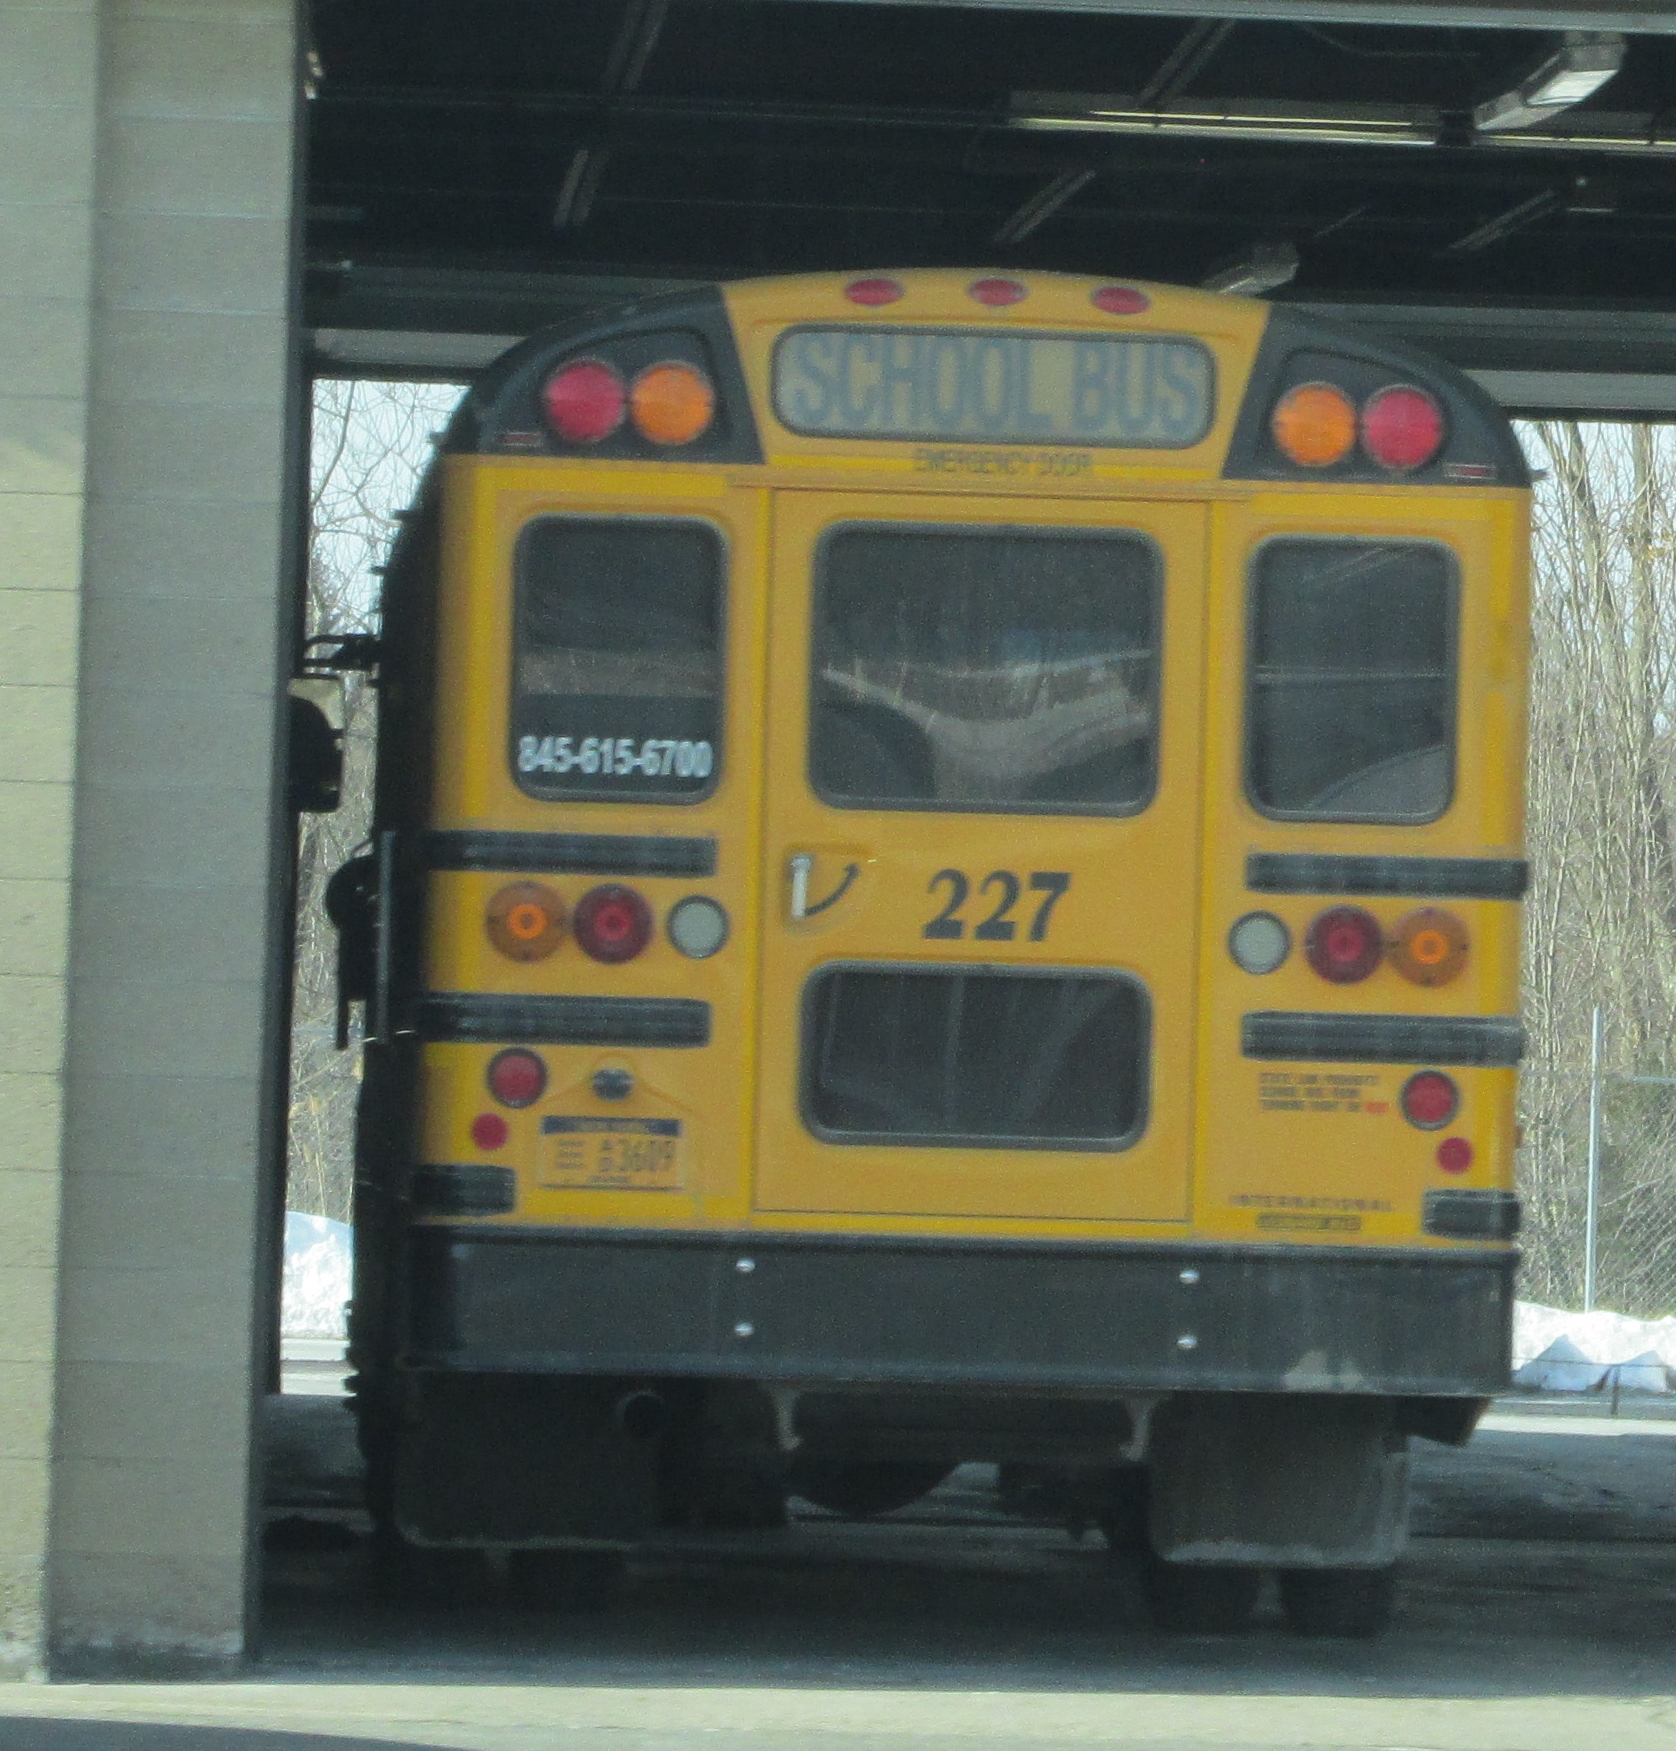 a school bus stopped at the bus station